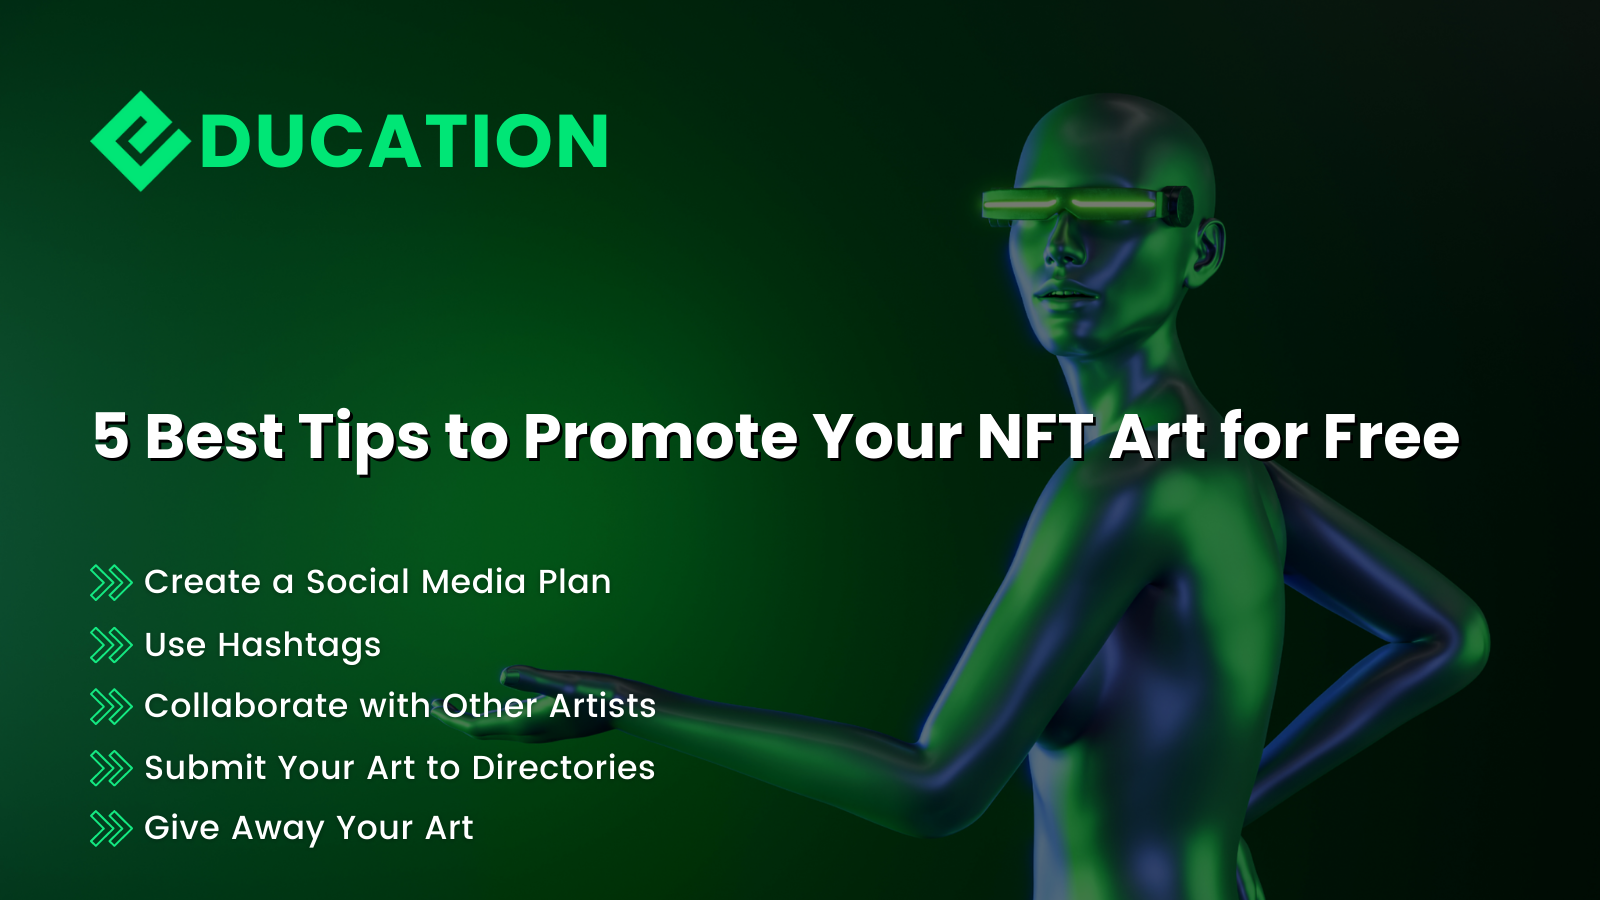 Cover image presenting the 5 best tips to promote your NFT art for free